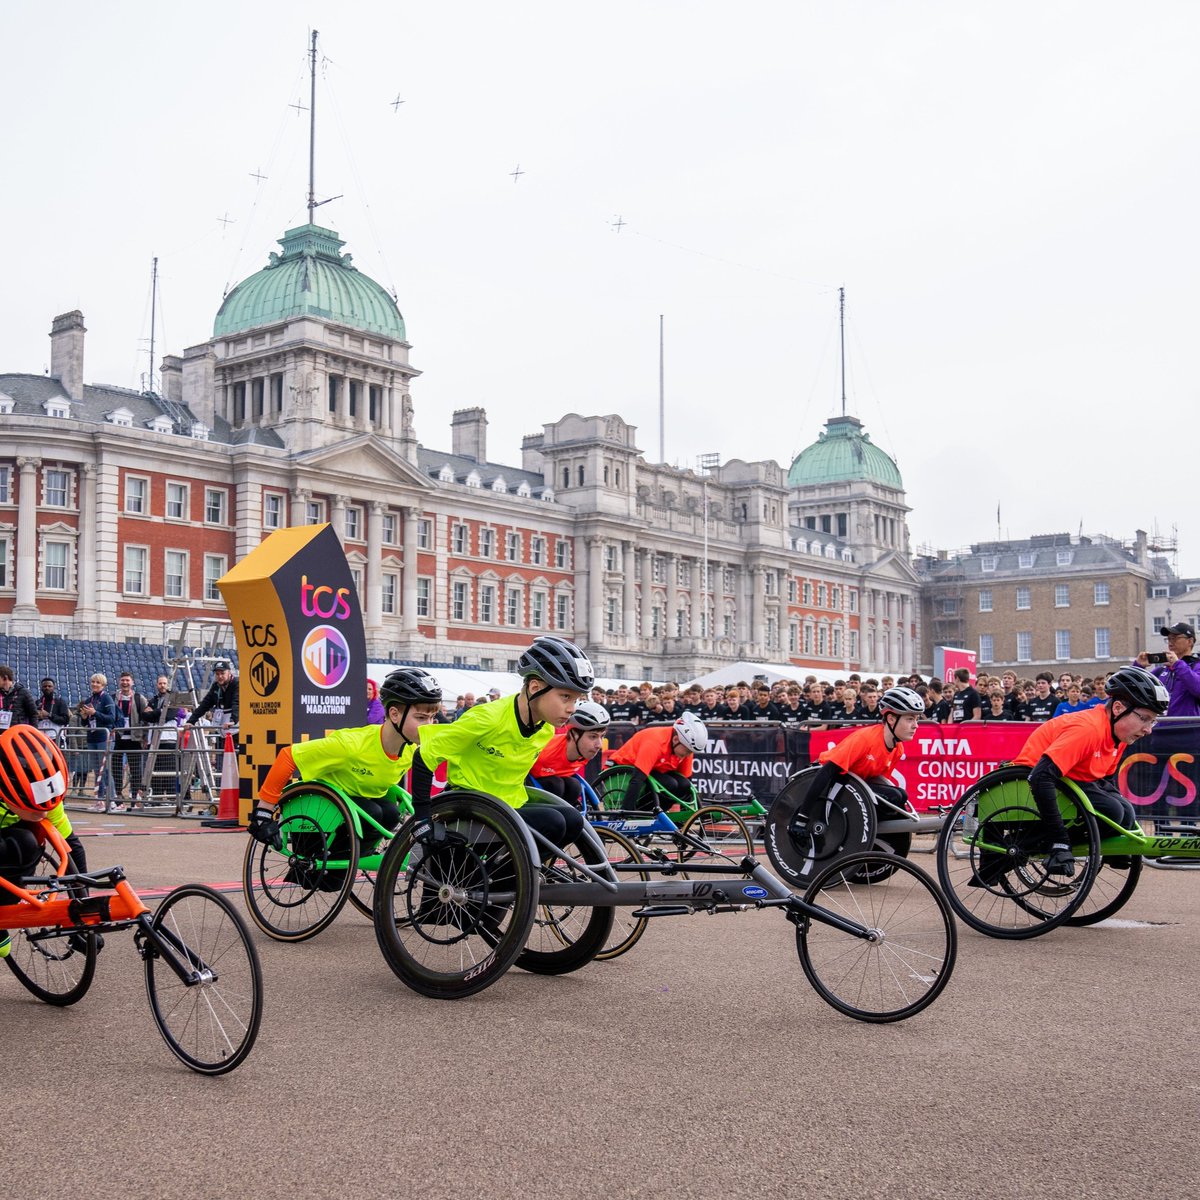 Good luck to everyone taking part in tomorrows #LondonMiniMarathon 🏅 A fantastic inclusive opportunity to cross the world-famous finish line on The Mall. Over the years, the event has launched the careers of Hannah Cockroft and Kare Adenegan, and David Weir! @londonmarathon